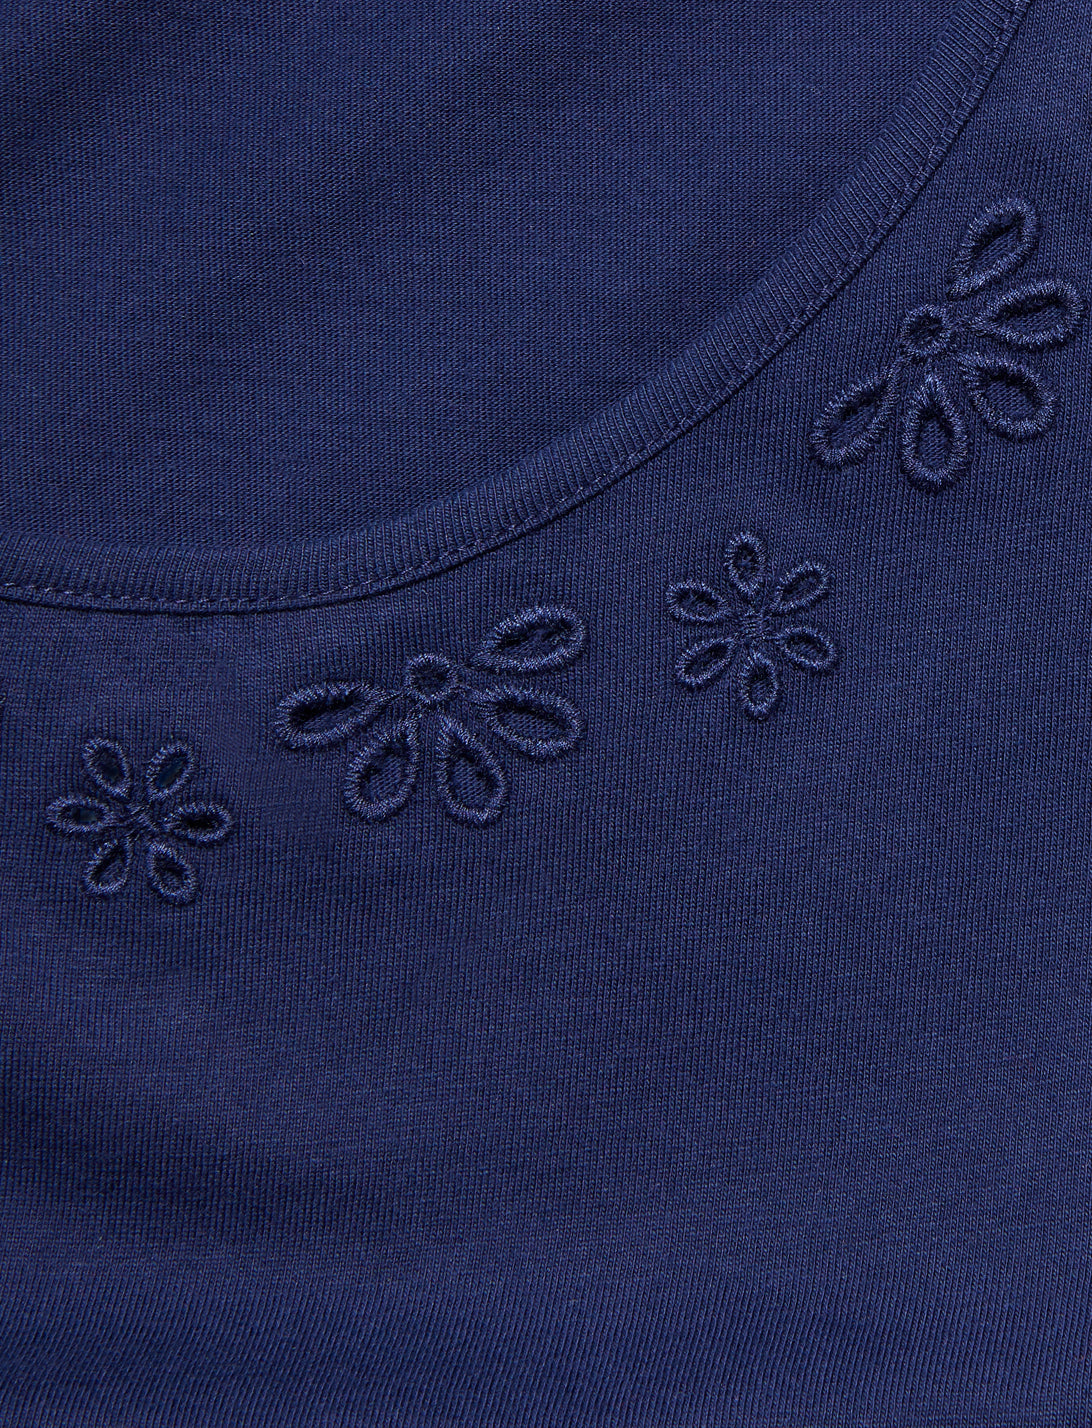 Embroidered Scoop Neck T-Shirt